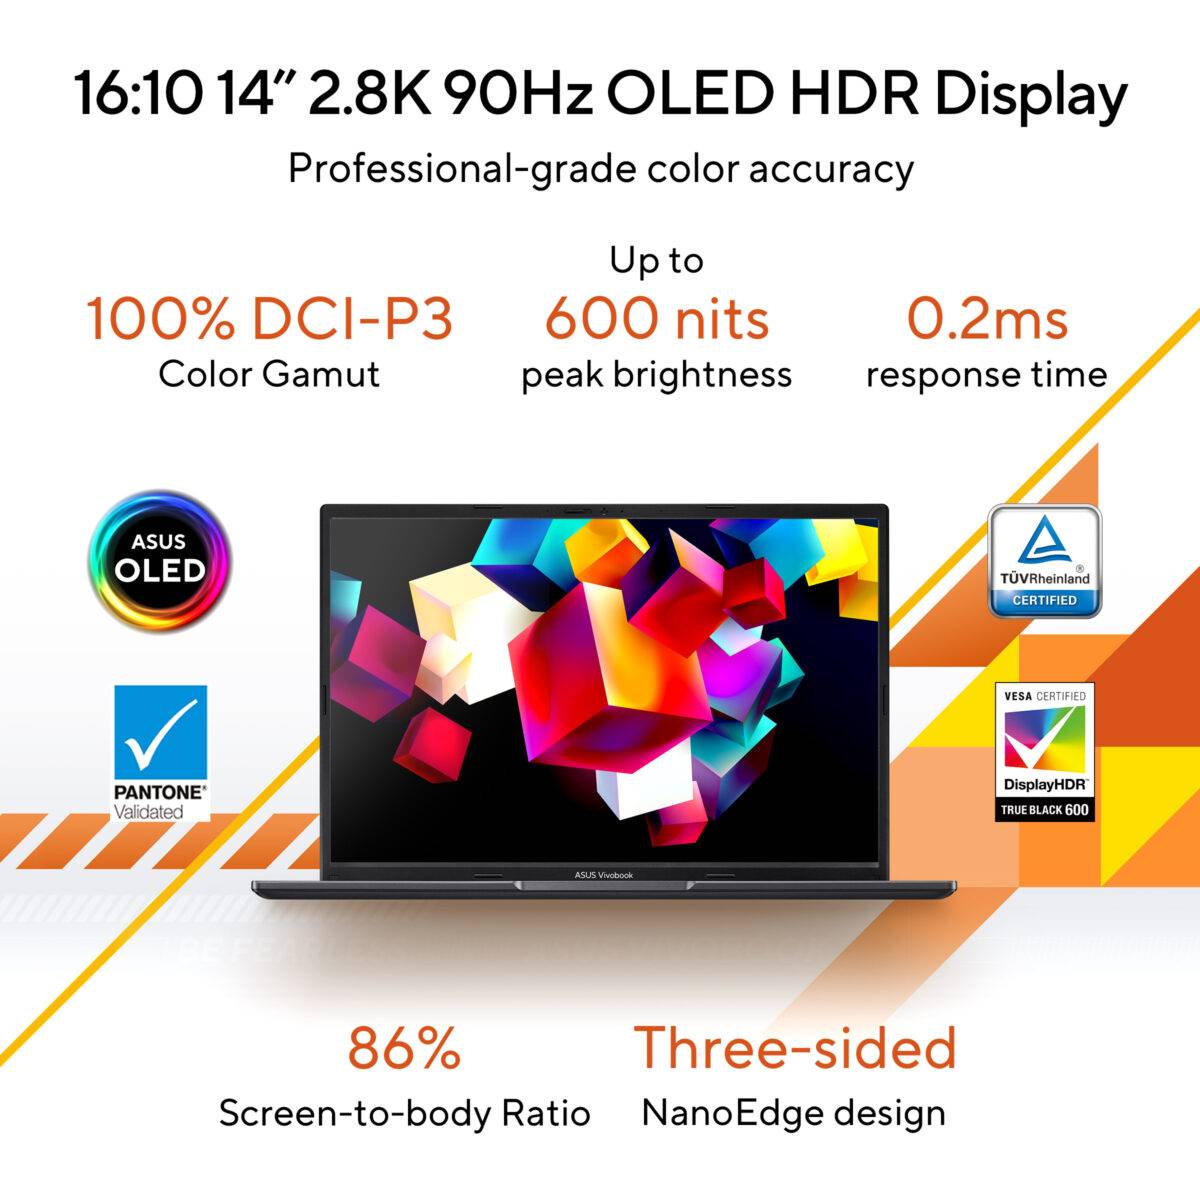 ASUS Vivobook 14 OLED M1405YA-KM741WS / M1405YA-KM541WS Feature up to 2.8K 90 Hz OLED display with TÜV Rheinland eye-care certificated panel provides superior visual experience and reduce the risk of eye strain during long viewing sessions.